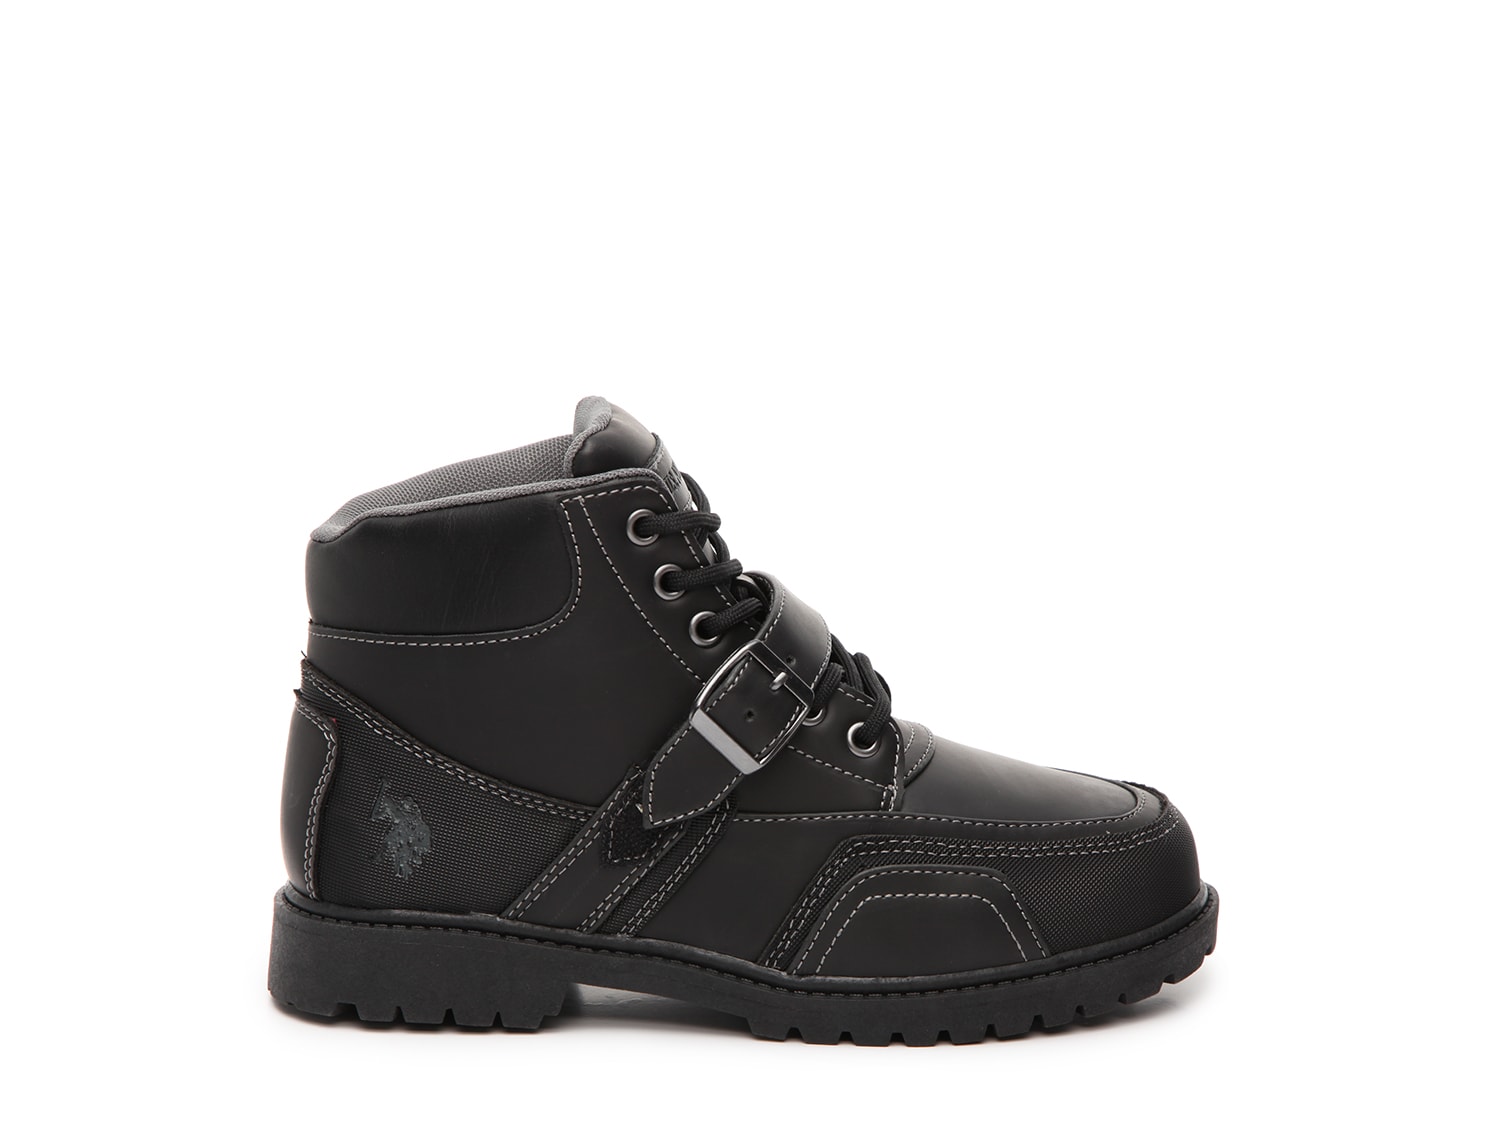 men's us polo assn andes boots